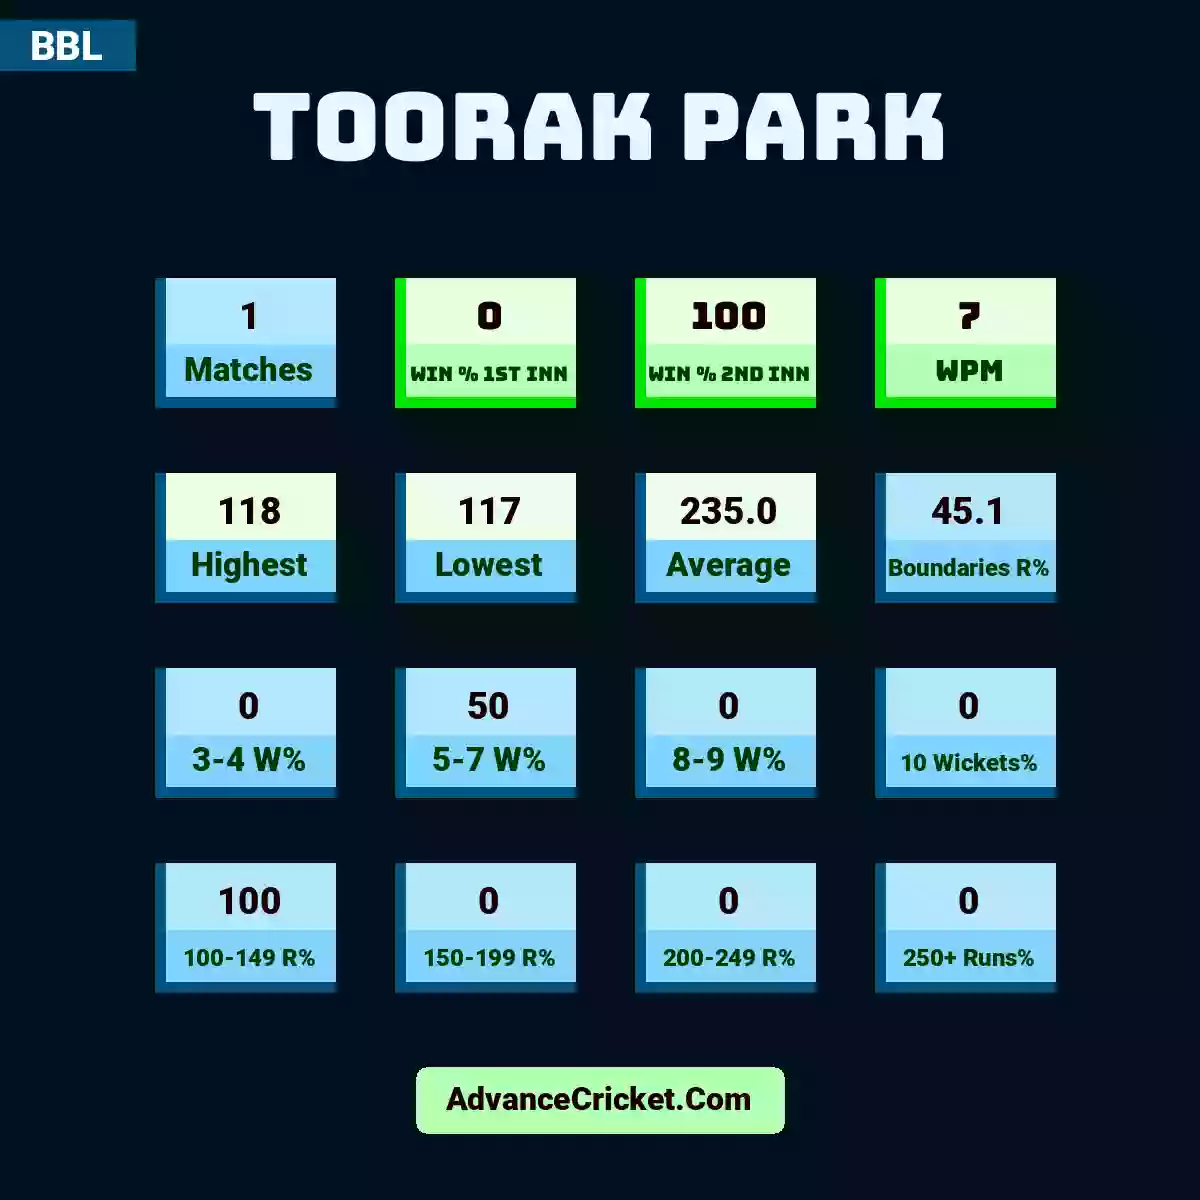 Image showing Toorak Park with Matches: 1, Win % 1st Inn: 0, Win % 2nd Inn: 100, WPM: 7, Highest: 118, Lowest: 117, Average: 235.0, Boundaries R%: 45.1, 3-4 W%: 0, 5-7 W%: 50, 8-9 W%: 0, 10 Wickets%: 0, 100-149 R%: 100, 150-199 R%: 0, 200-249 R%: 0, 250+ Runs%: 0.